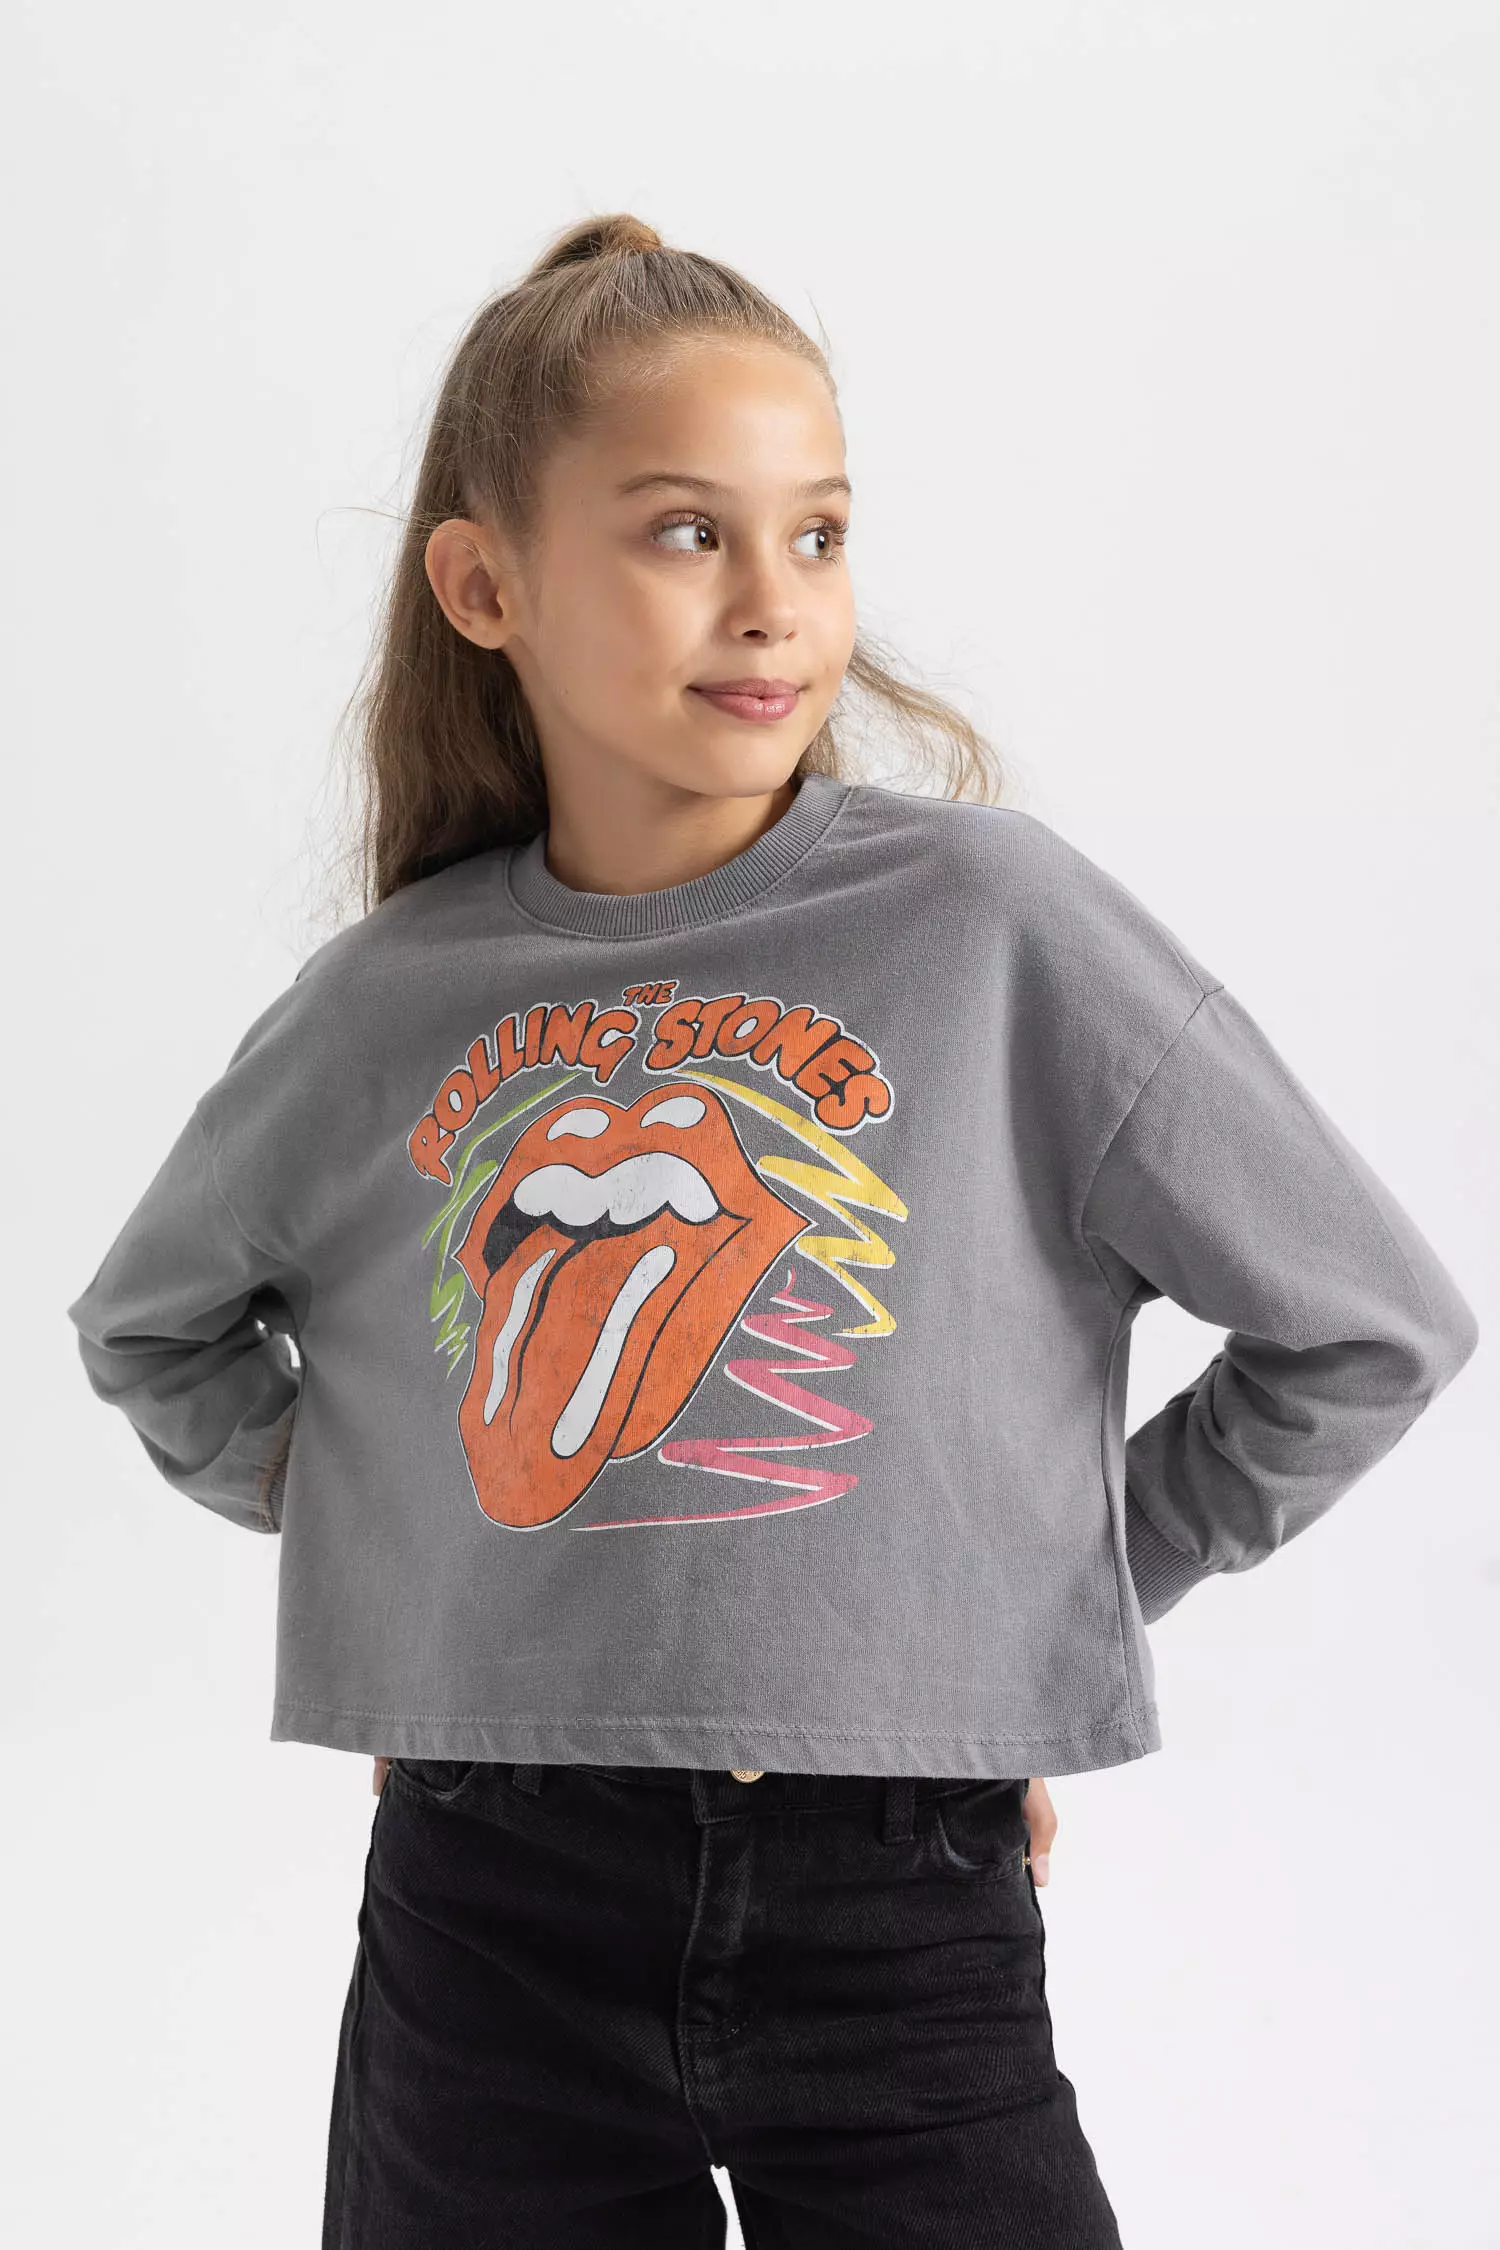 Relax Fit Rolling Stones Licensed Long Sleeve Cotton Body